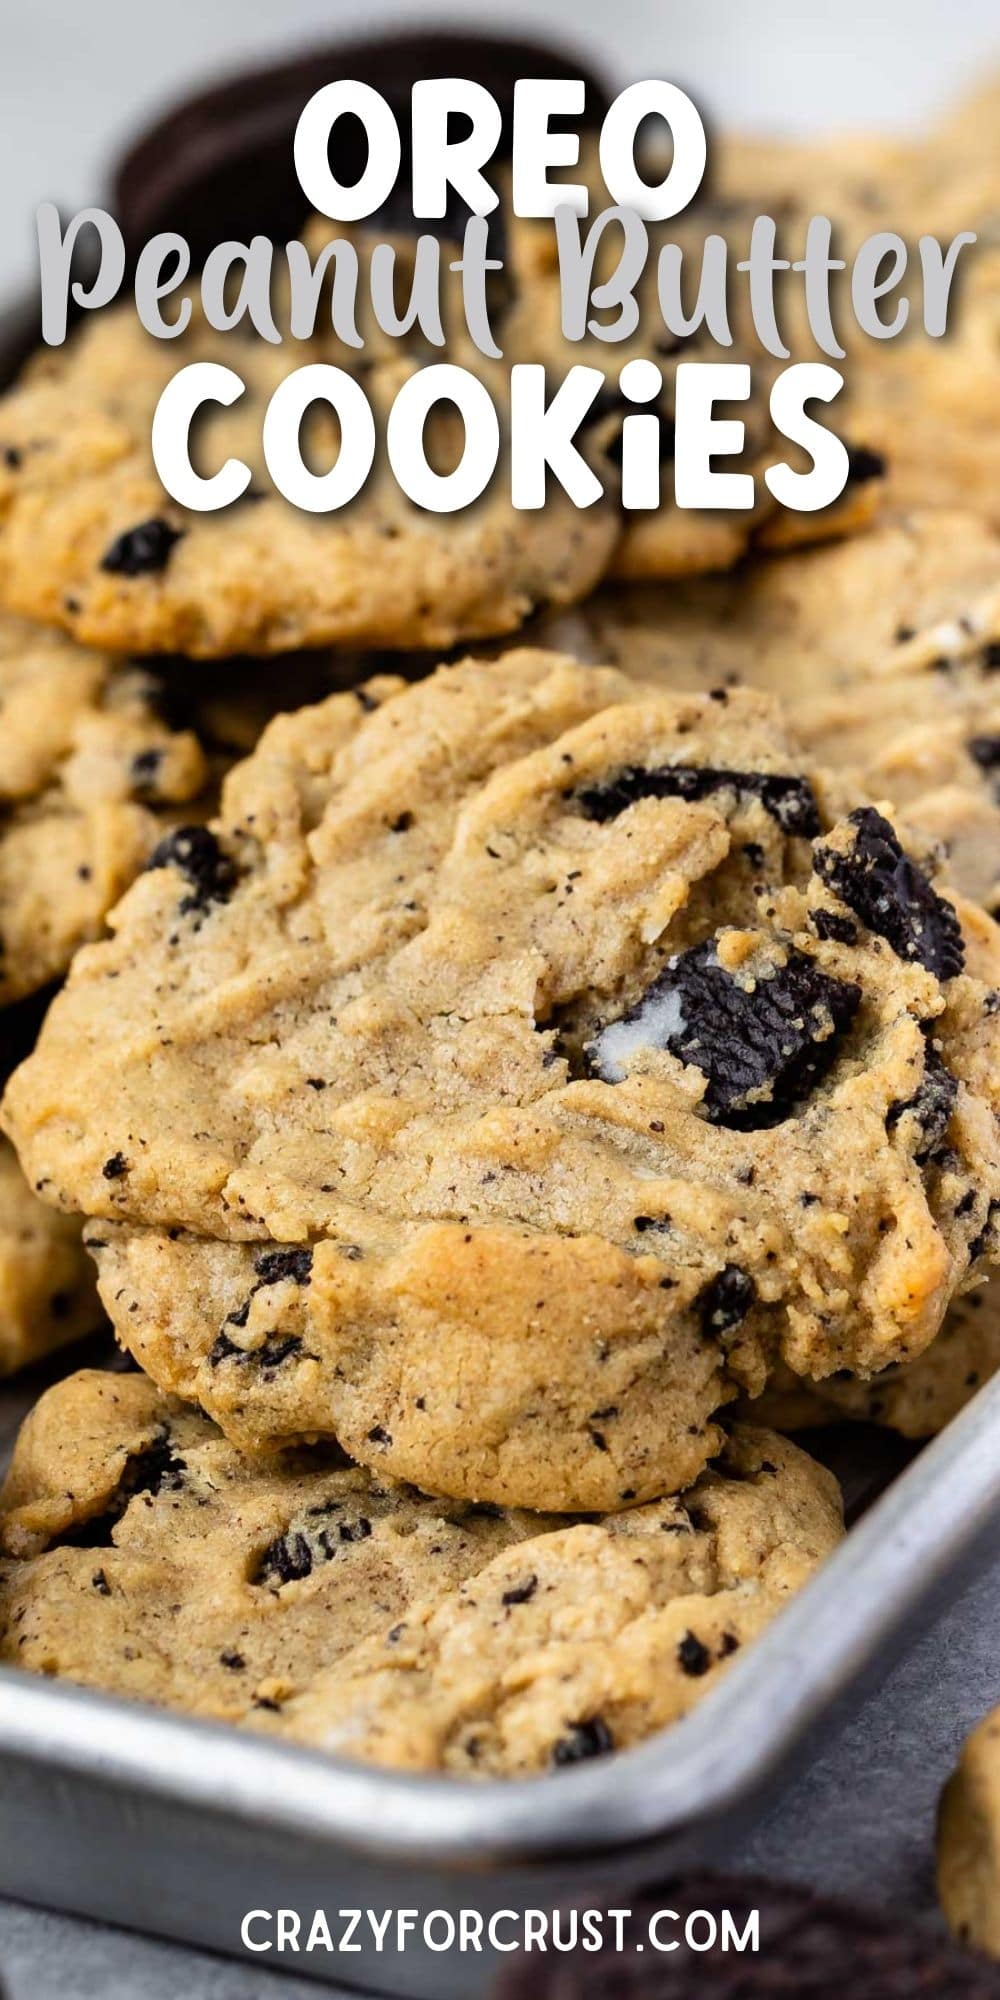 Oreo peanut butter cookies in a dish with recipe title on top of image